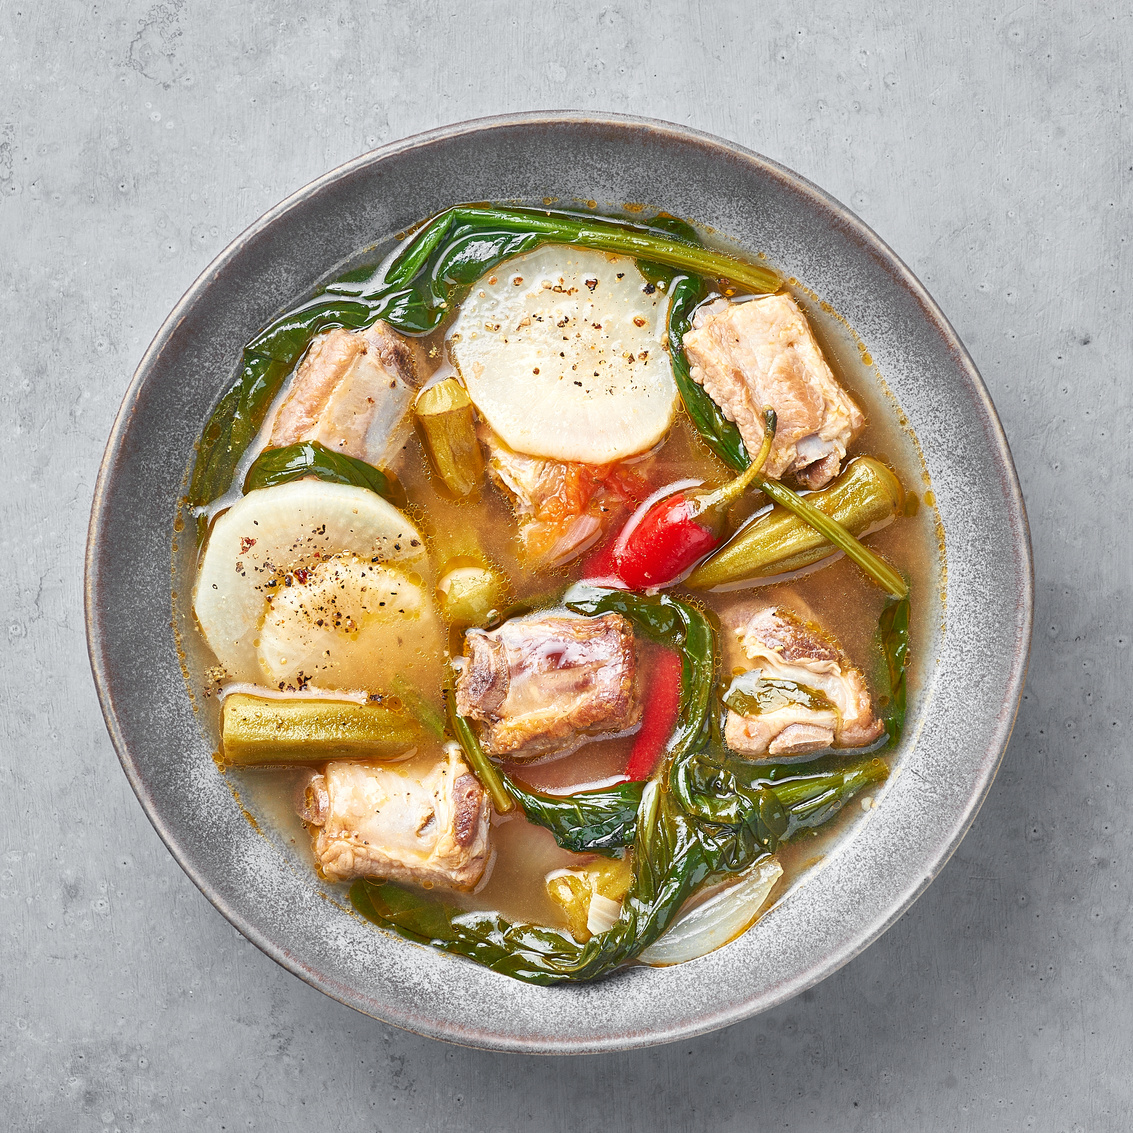 Sinigang na Baboy dish or Filipino Pork Meat Soup in gray bowl on concrete backdrop. Filipino Food. Asian Meal